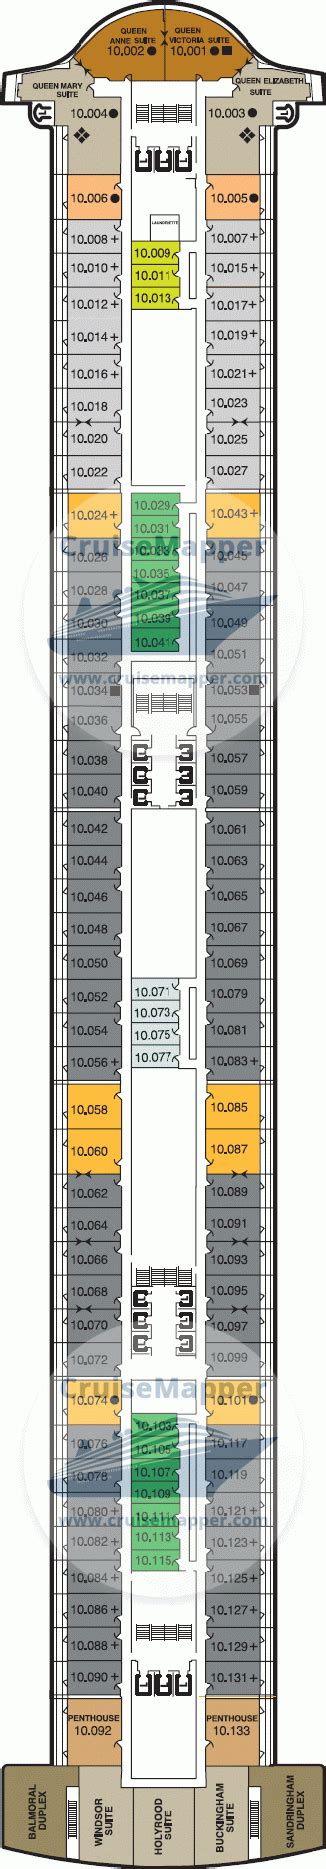 queen mary 2 deck plan 10